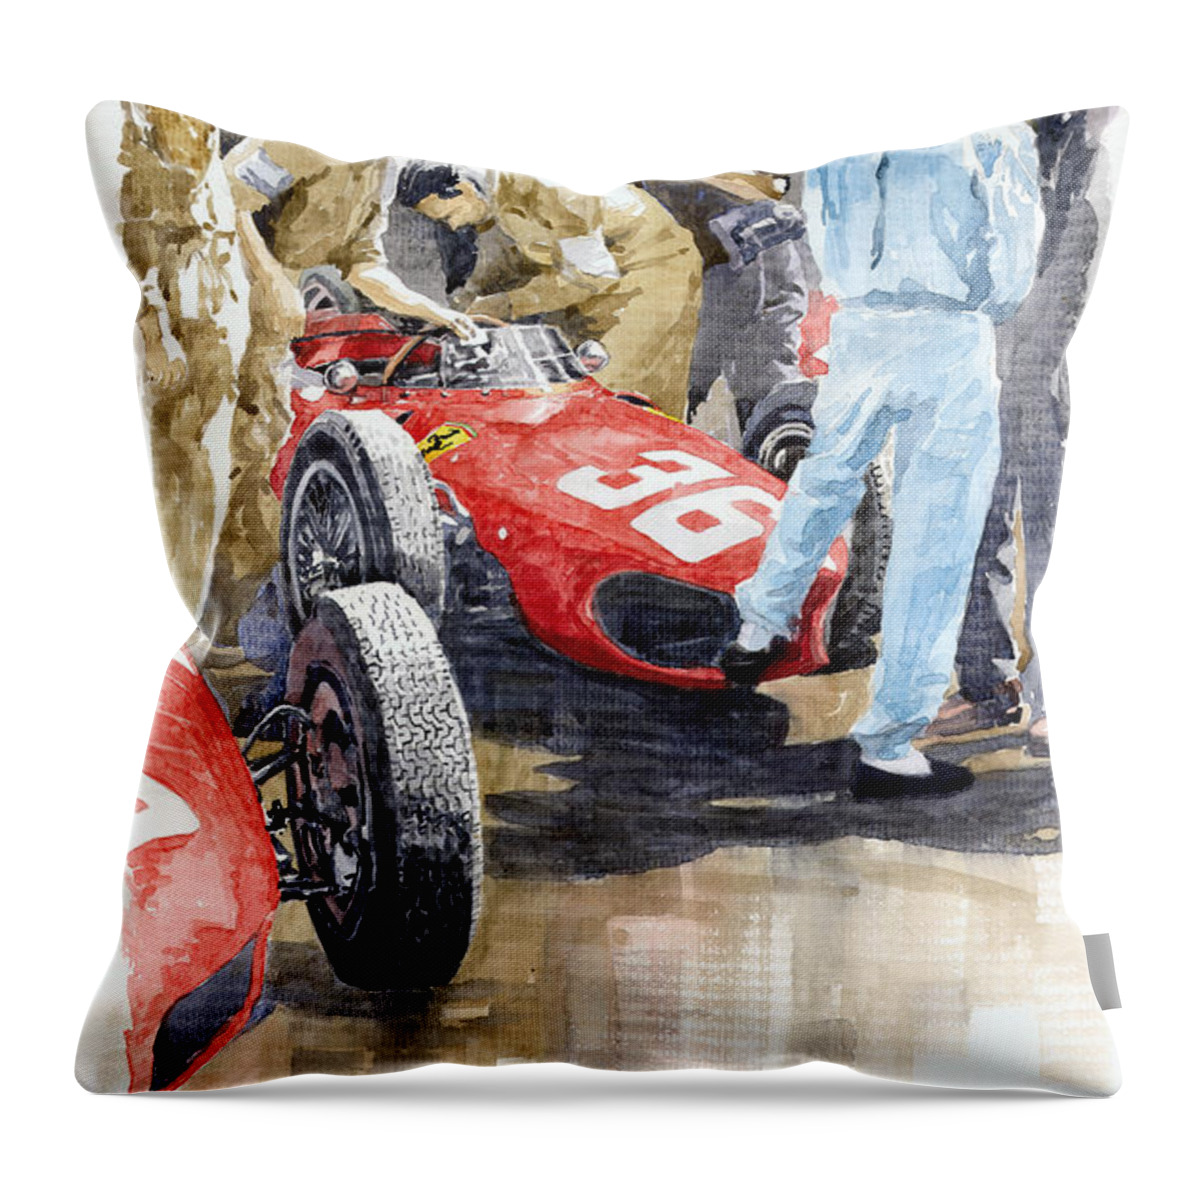 Watercolor Throw Pillow featuring the painting Monaco GP 1961 Ferrari 156 Sharknose Richie Ginther by Yuriy Shevchuk